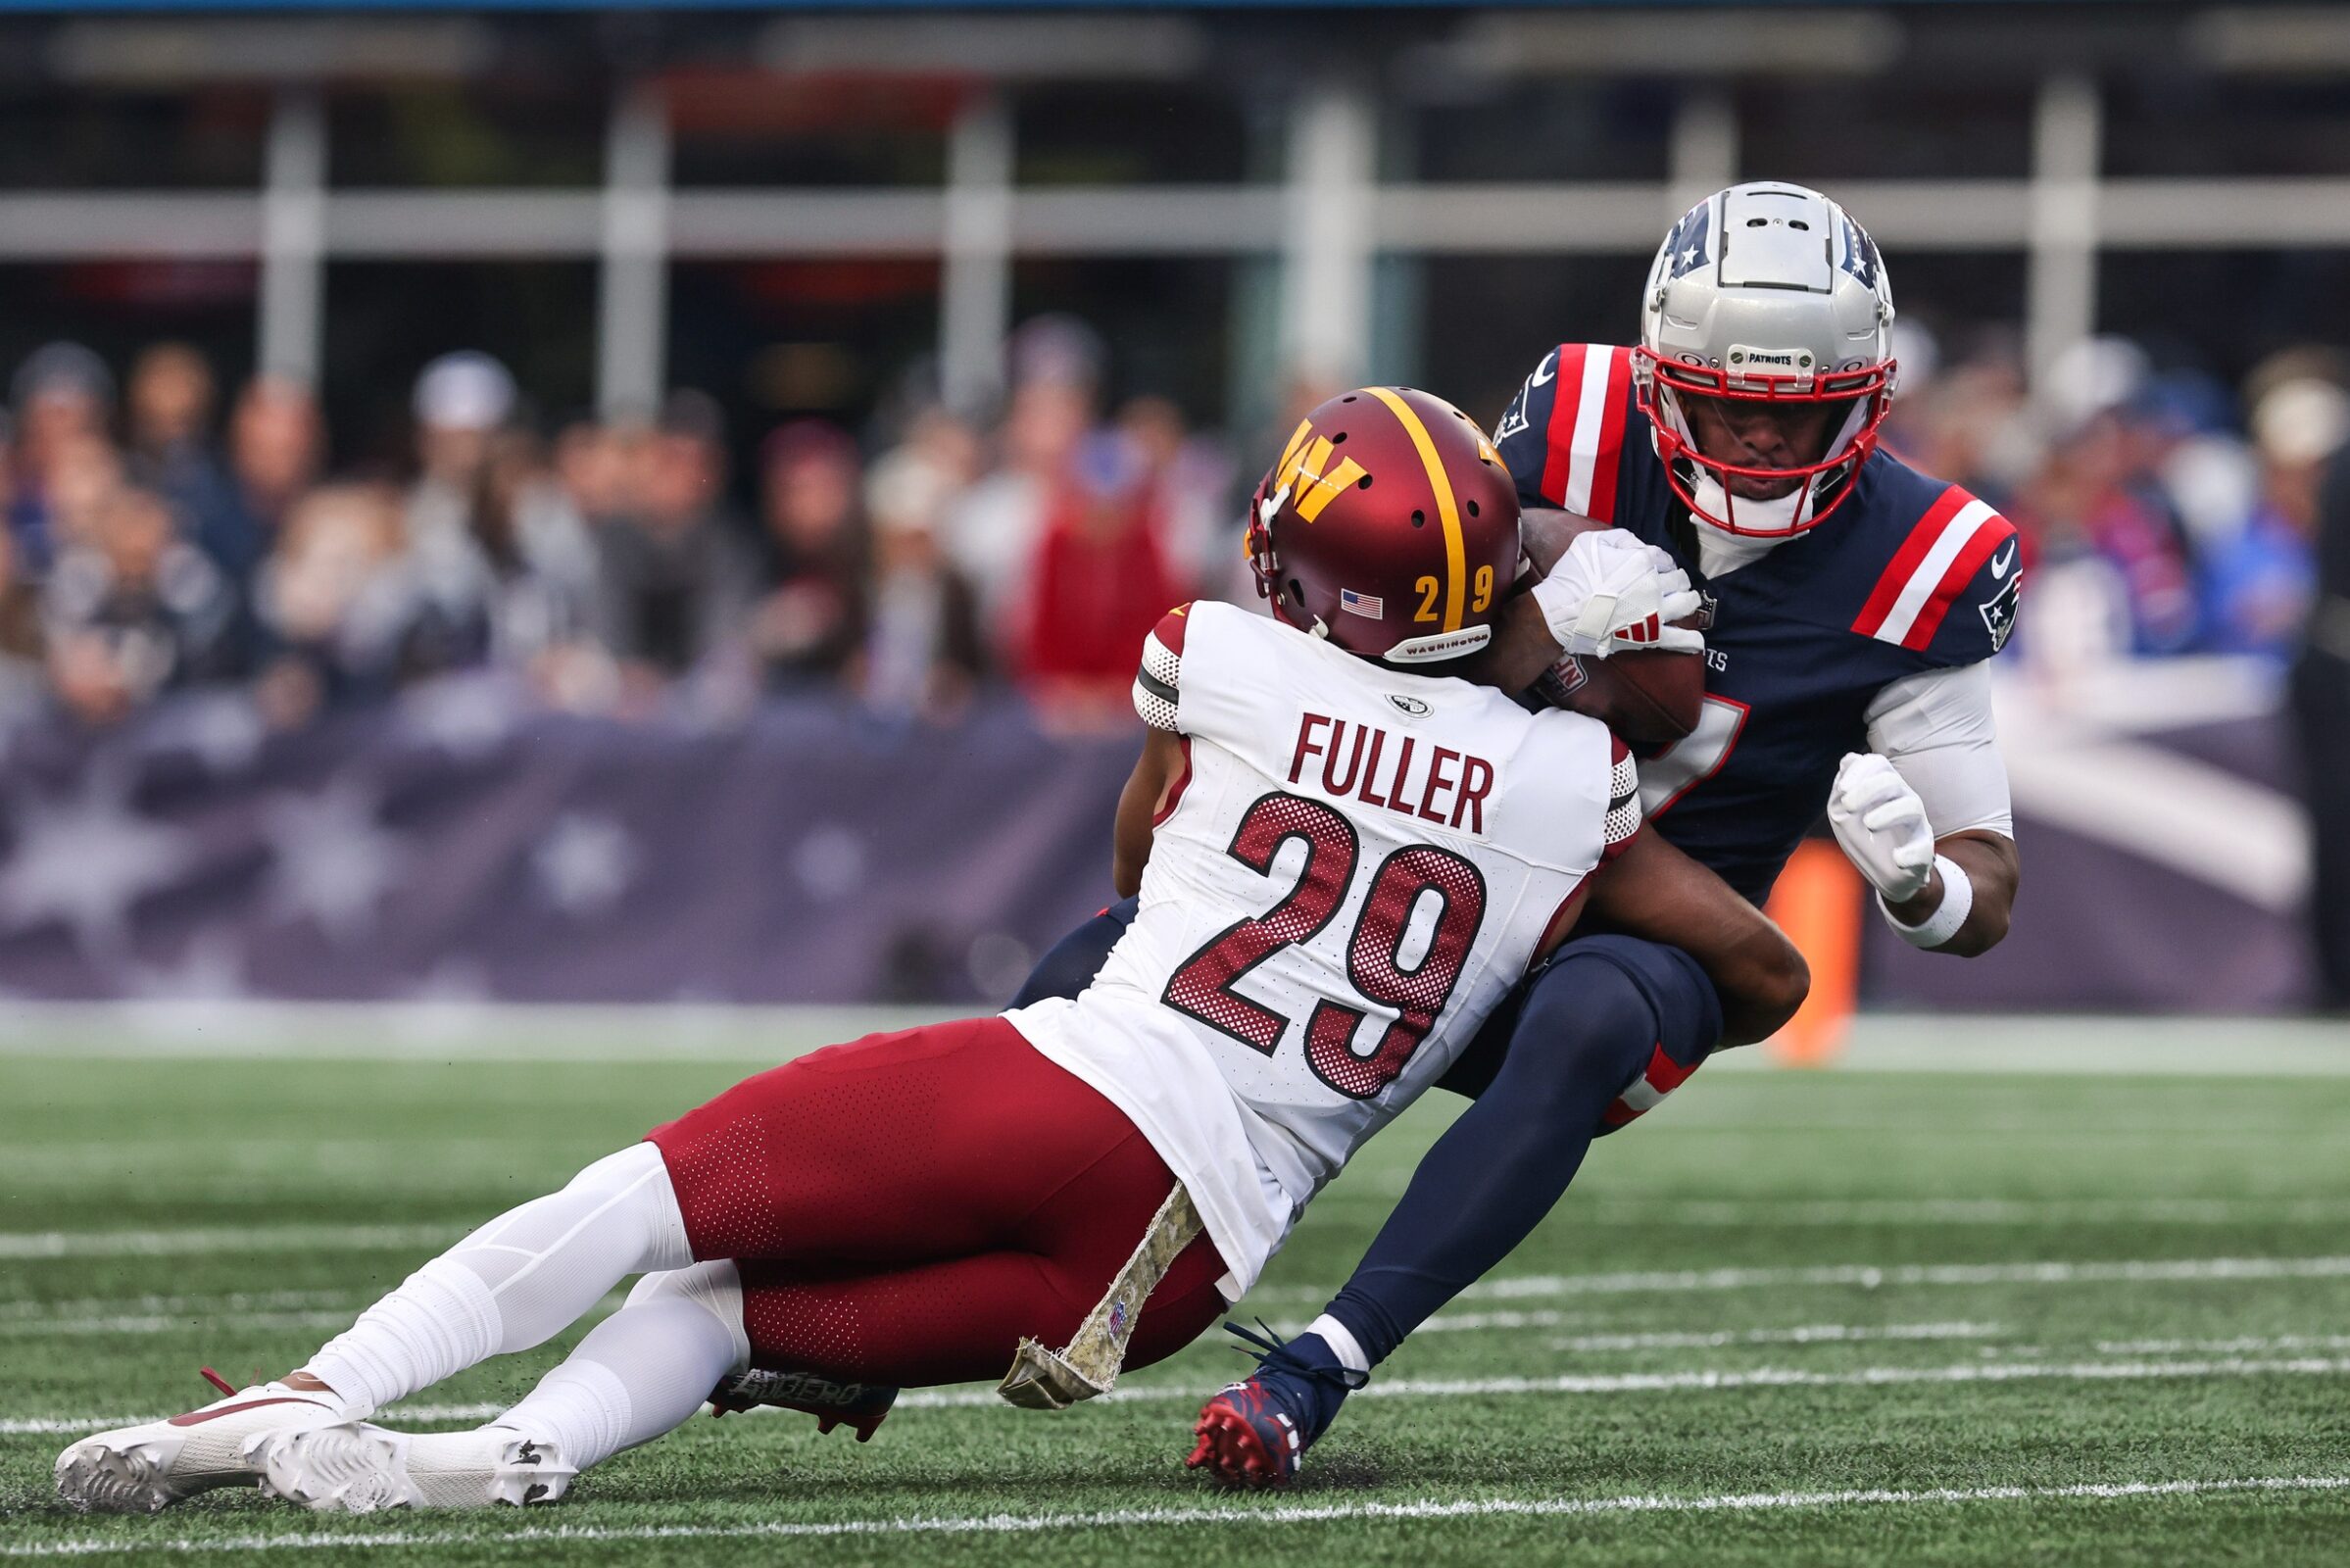 Kendall Fuller, Lions, NFL Free Agency